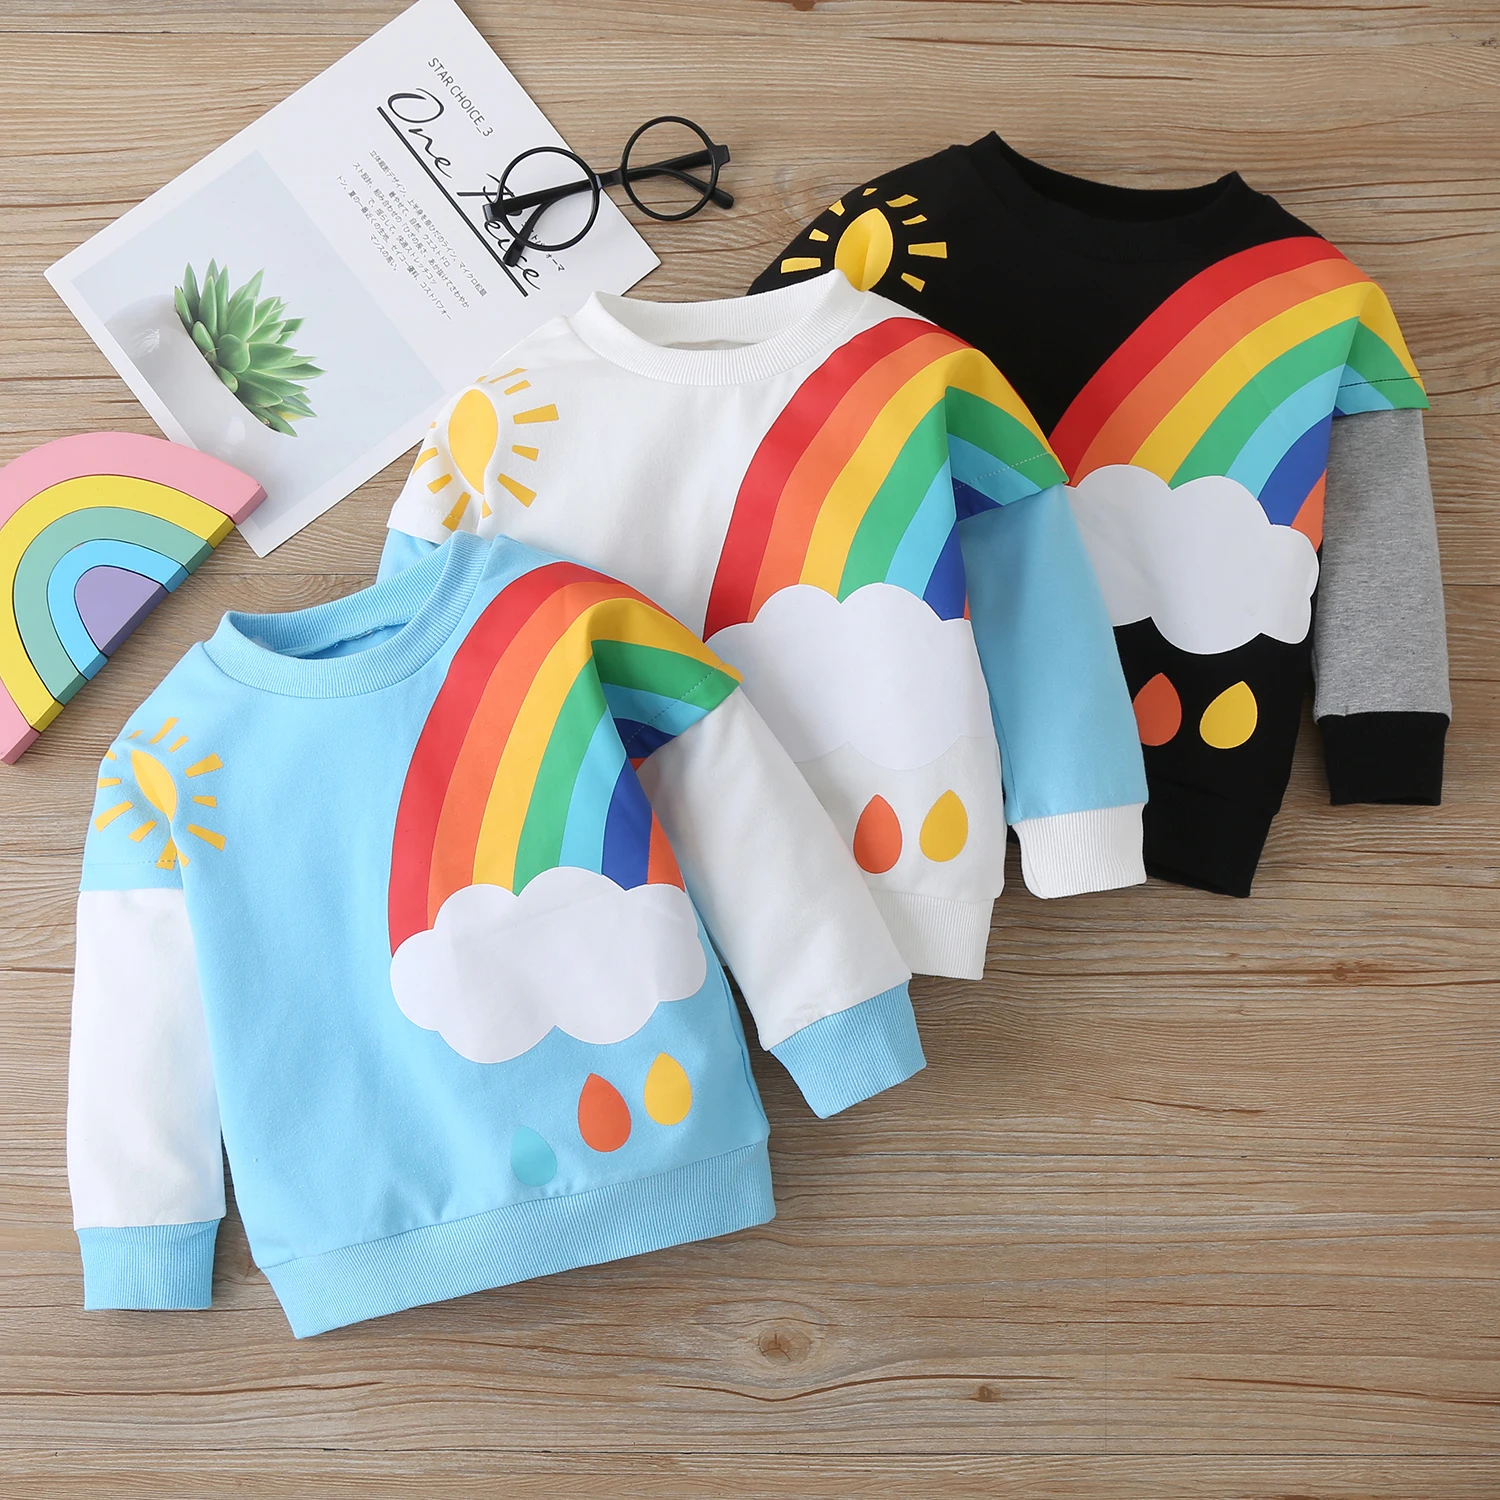 Toddler Kids Baby Boy Girl Rainbow/Letter Pullover Sweatshirt Long Sleeve Tops Cotton Shirt Fall Winter Clothes 